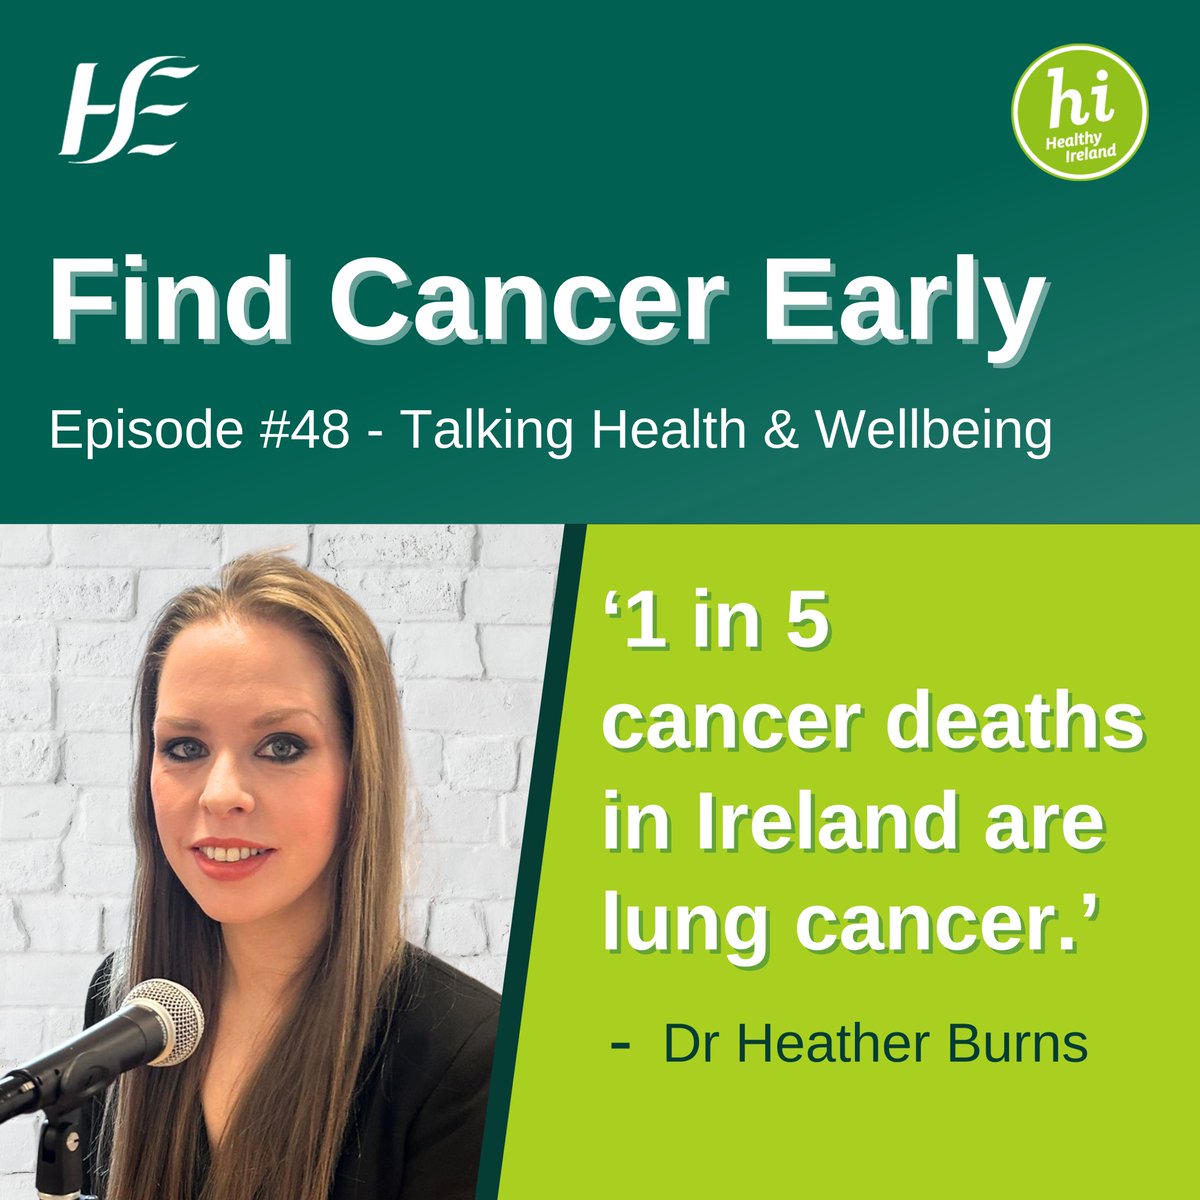 Listen to the latest episode of the HSE #TalkingHealthandWellbeing #Podcast with @hseNCCP for a discussion on early cancer detection and what symptoms to look out for. Listen on #Spotify: spoti.fi/3x1n36D